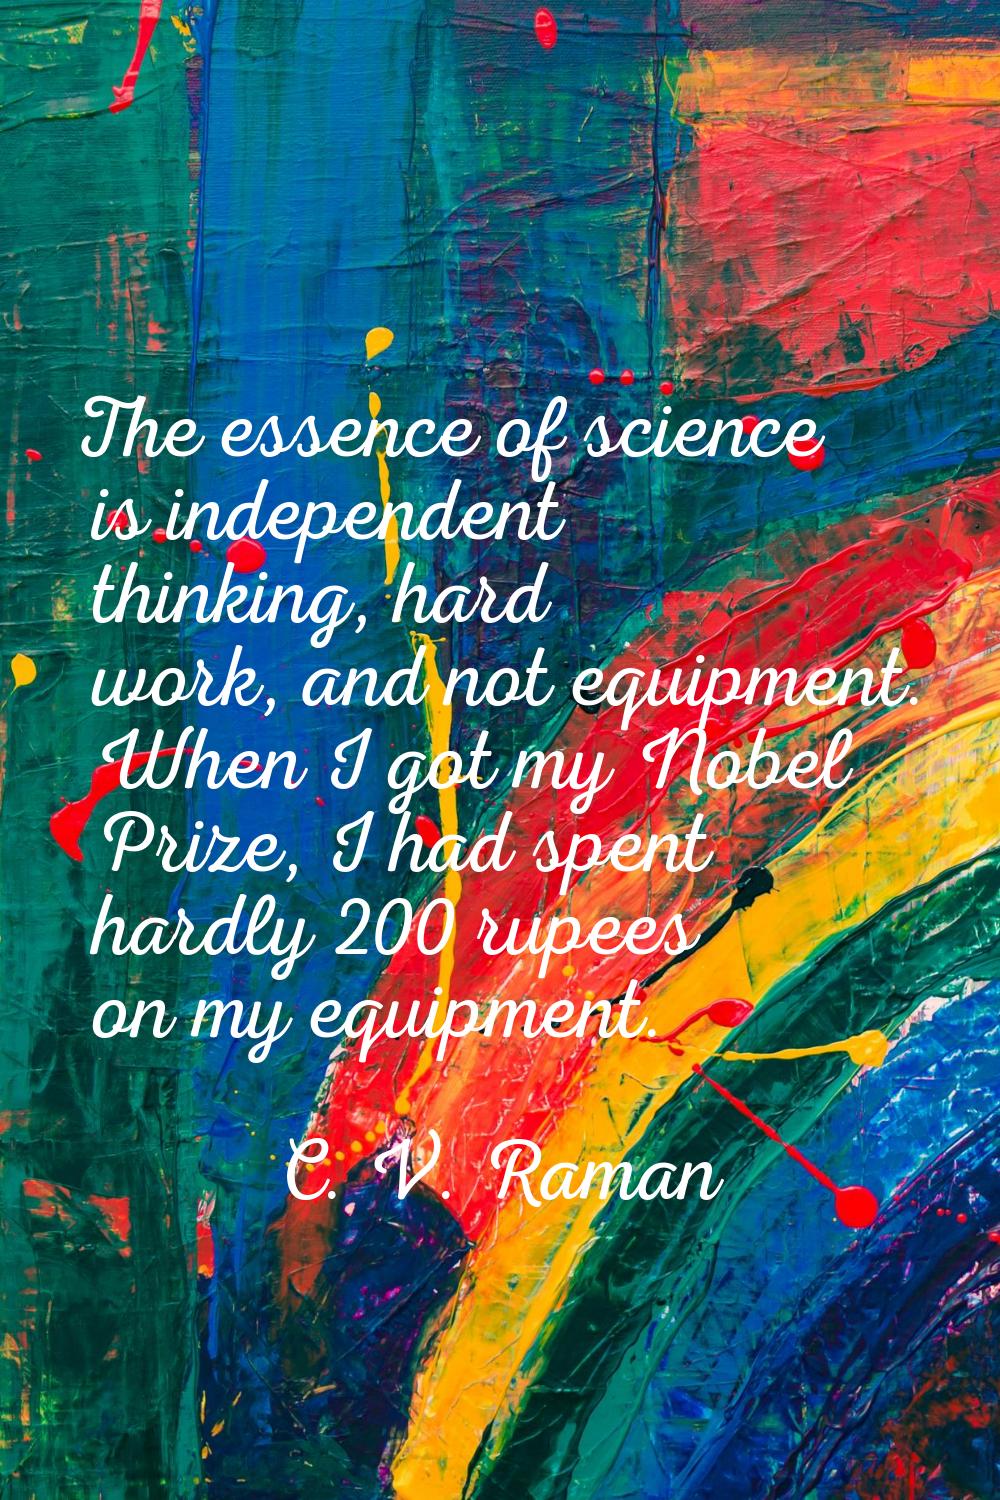 The essence of science is independent thinking, hard work, and not equipment. When I got my Nobel P